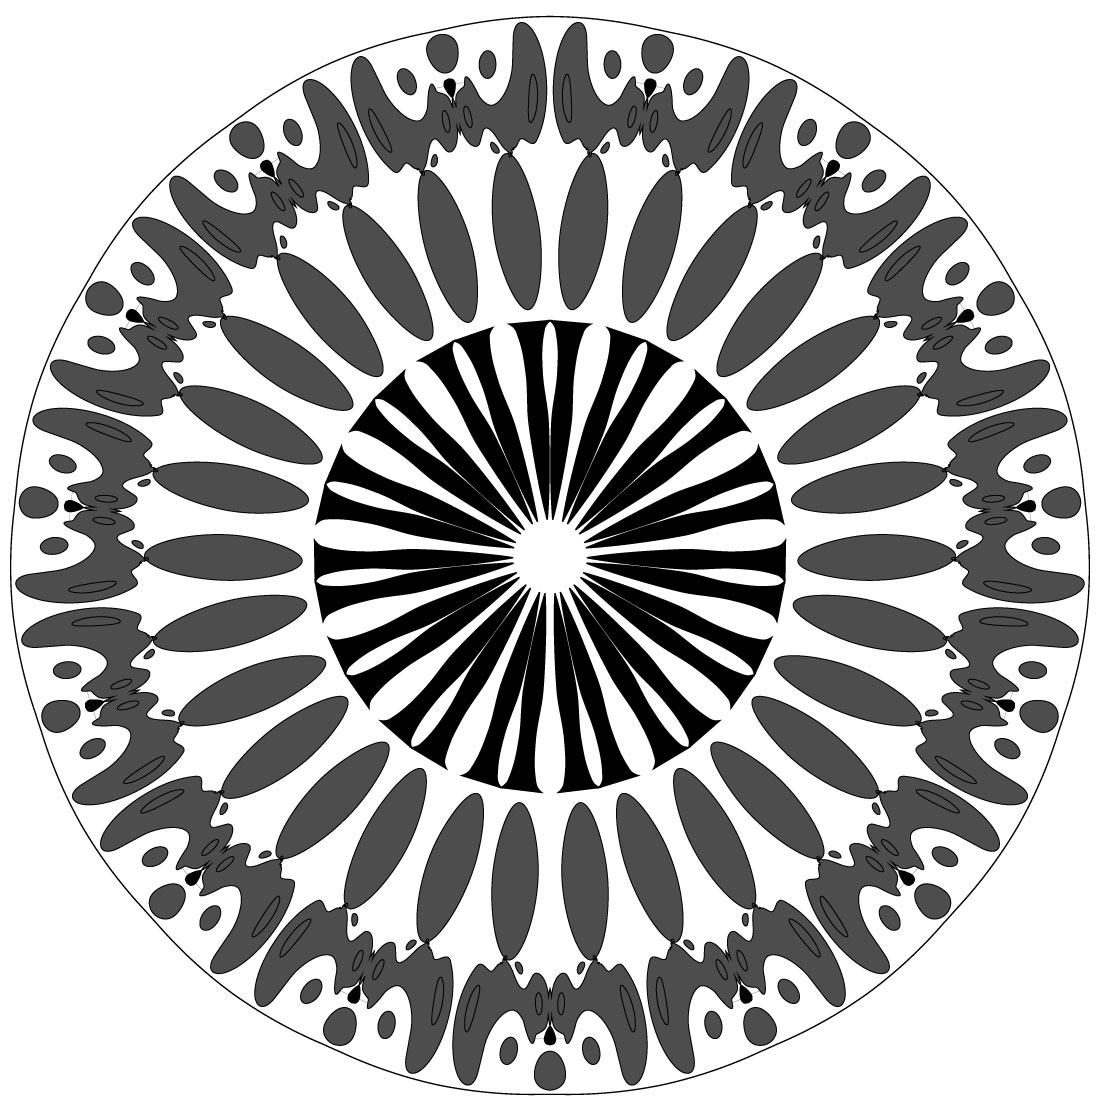 Mandala-Art-with-Bat-in-black-and-white cover image.